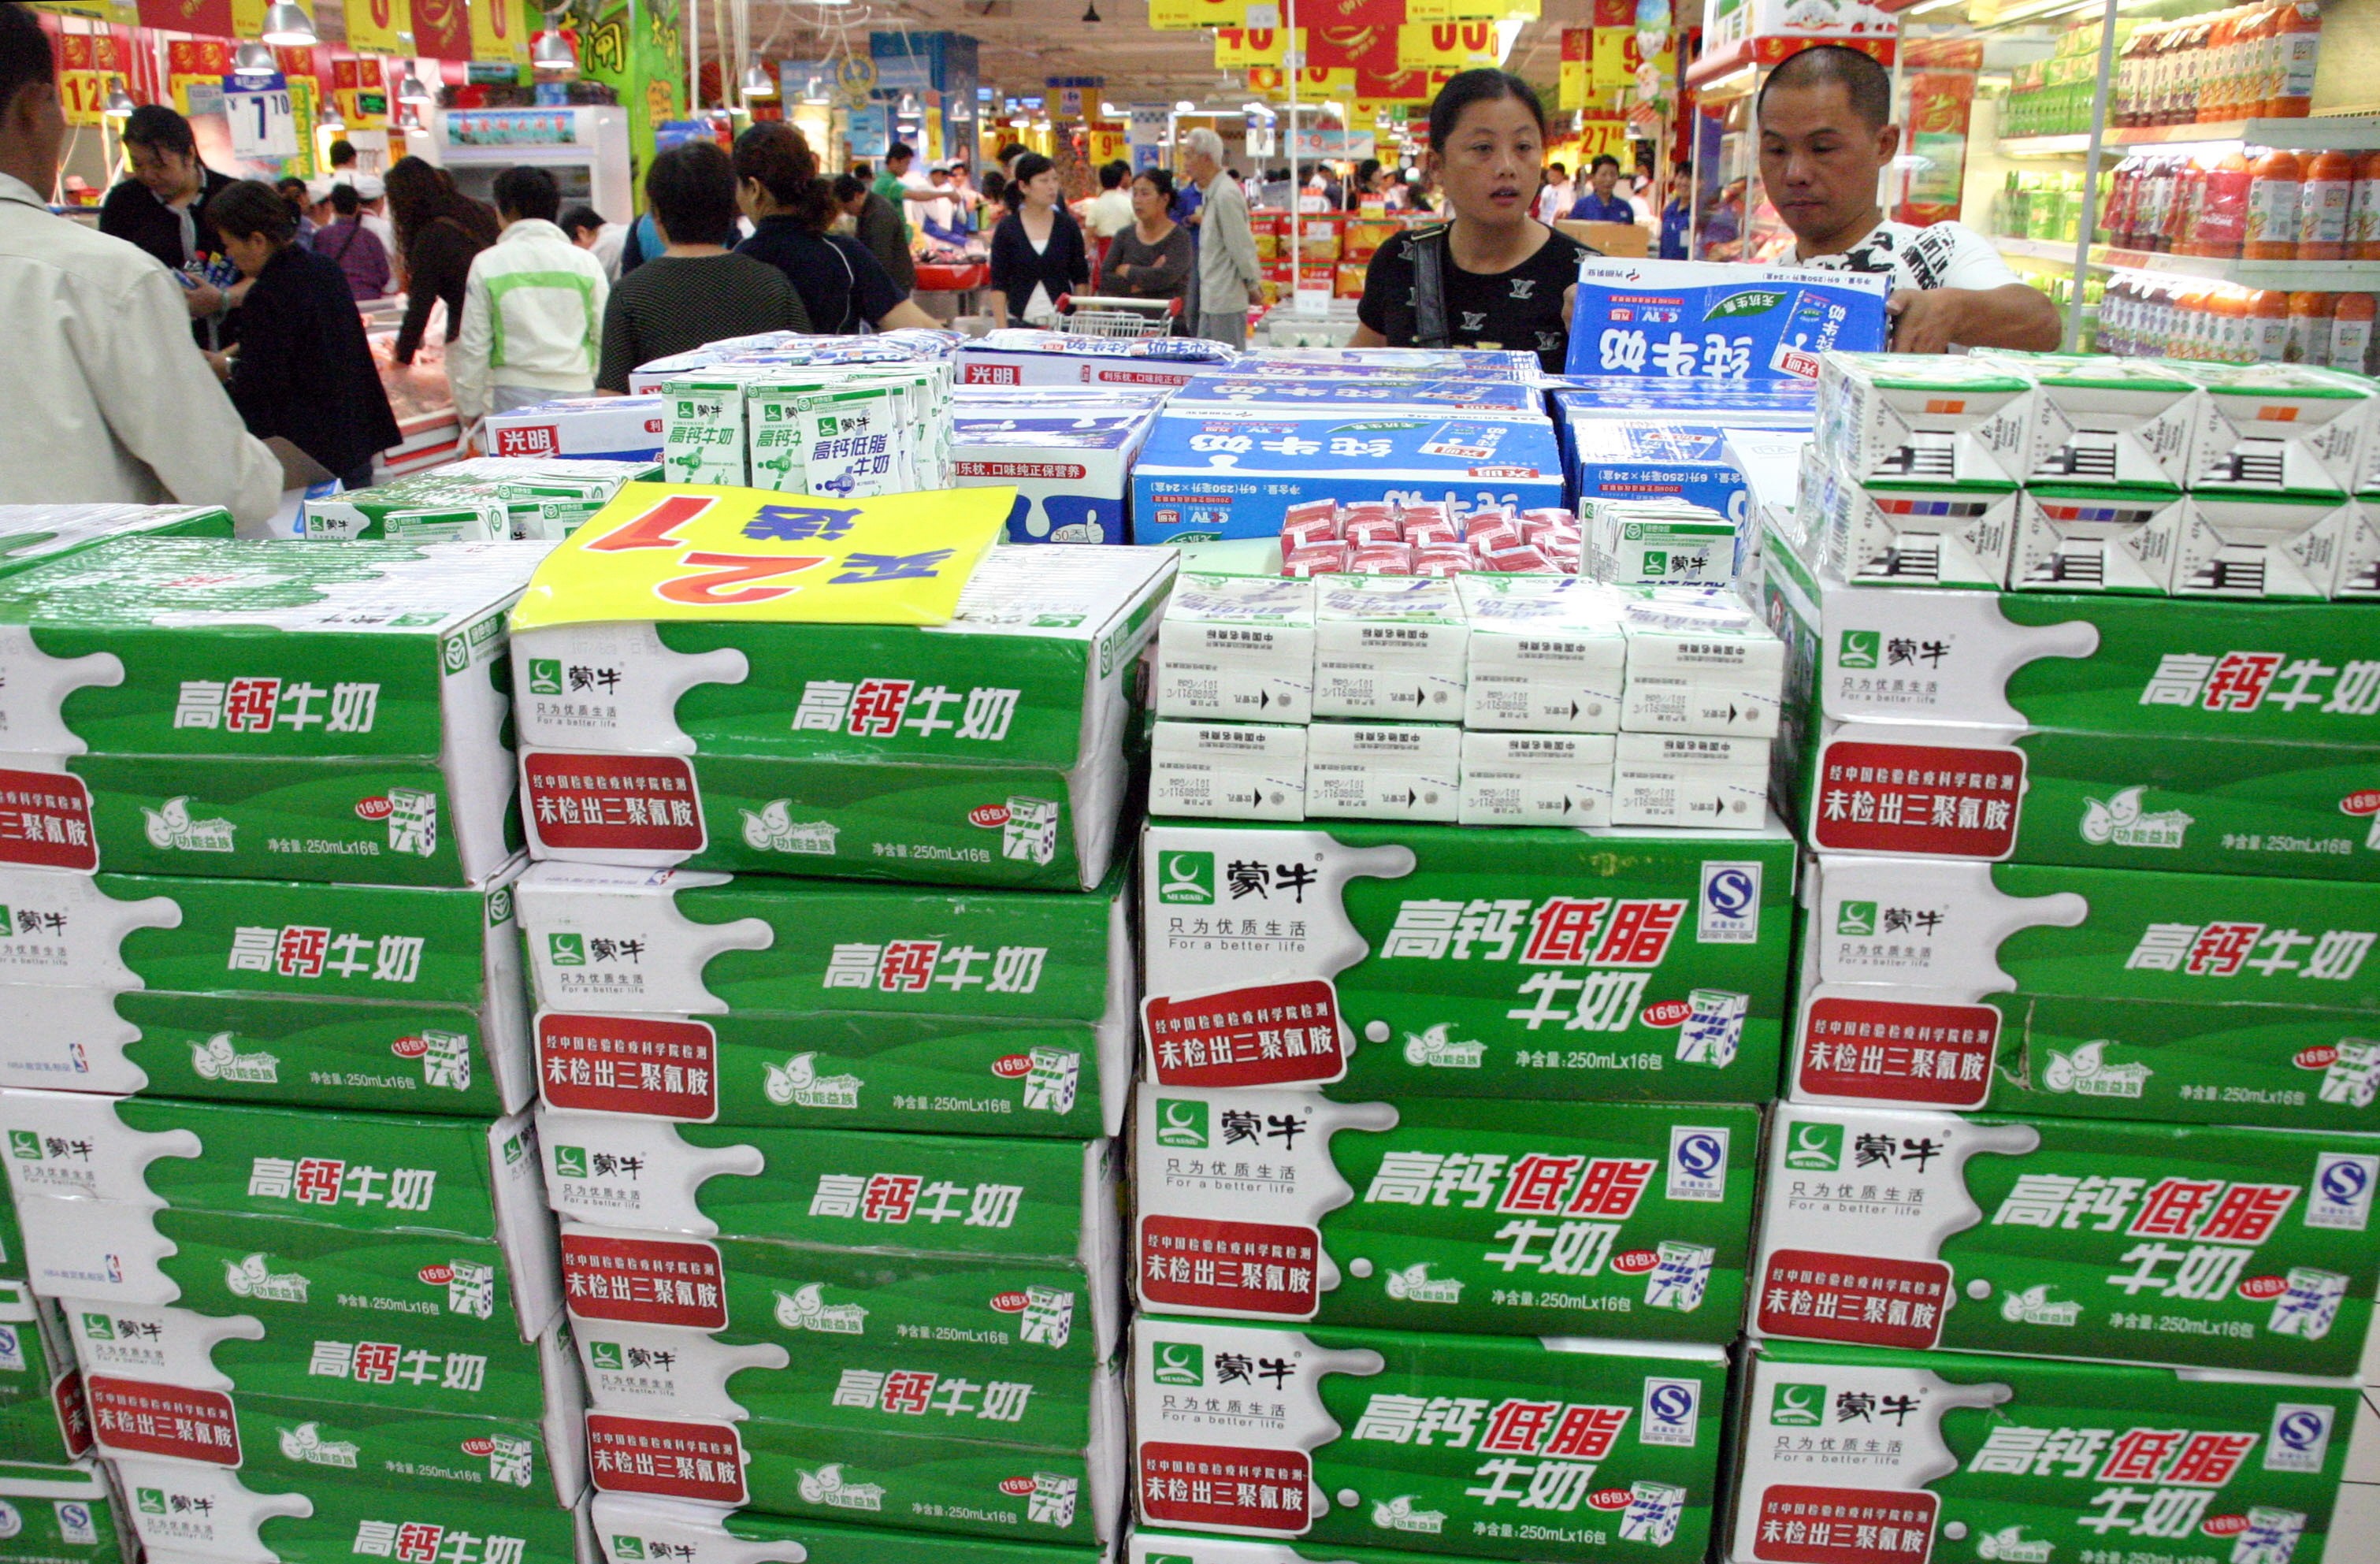 Chinese customers check out milk products at a store in Nanjing. Shares in Mengniu jumped 5.5 per cent to close at HK$27.95 in Hong Kong on Thursday, following the year-end results’ announcement. Photo: AFP